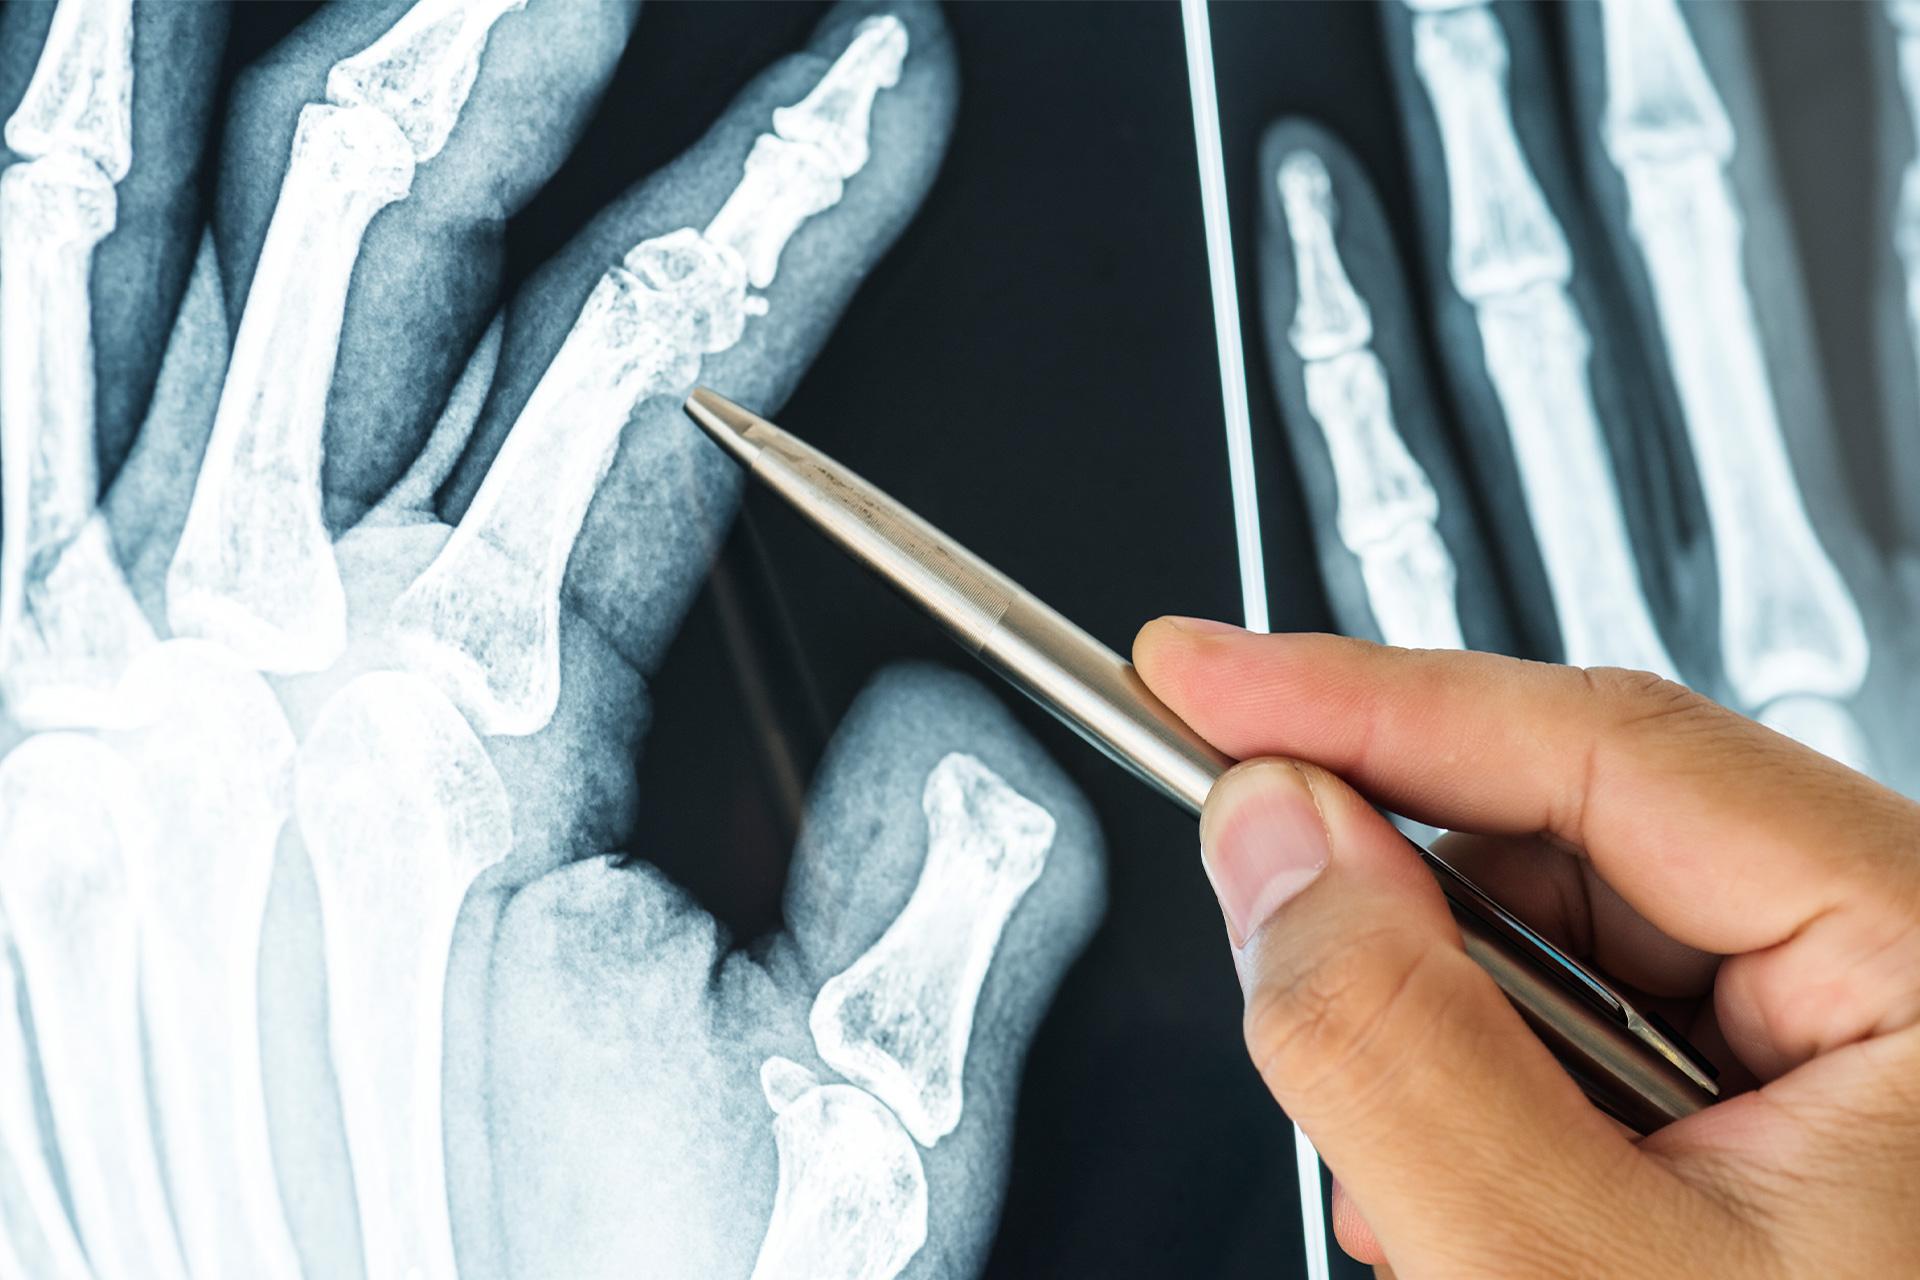 Fracture in Bones: Causes, Types, Symptoms and Treatment